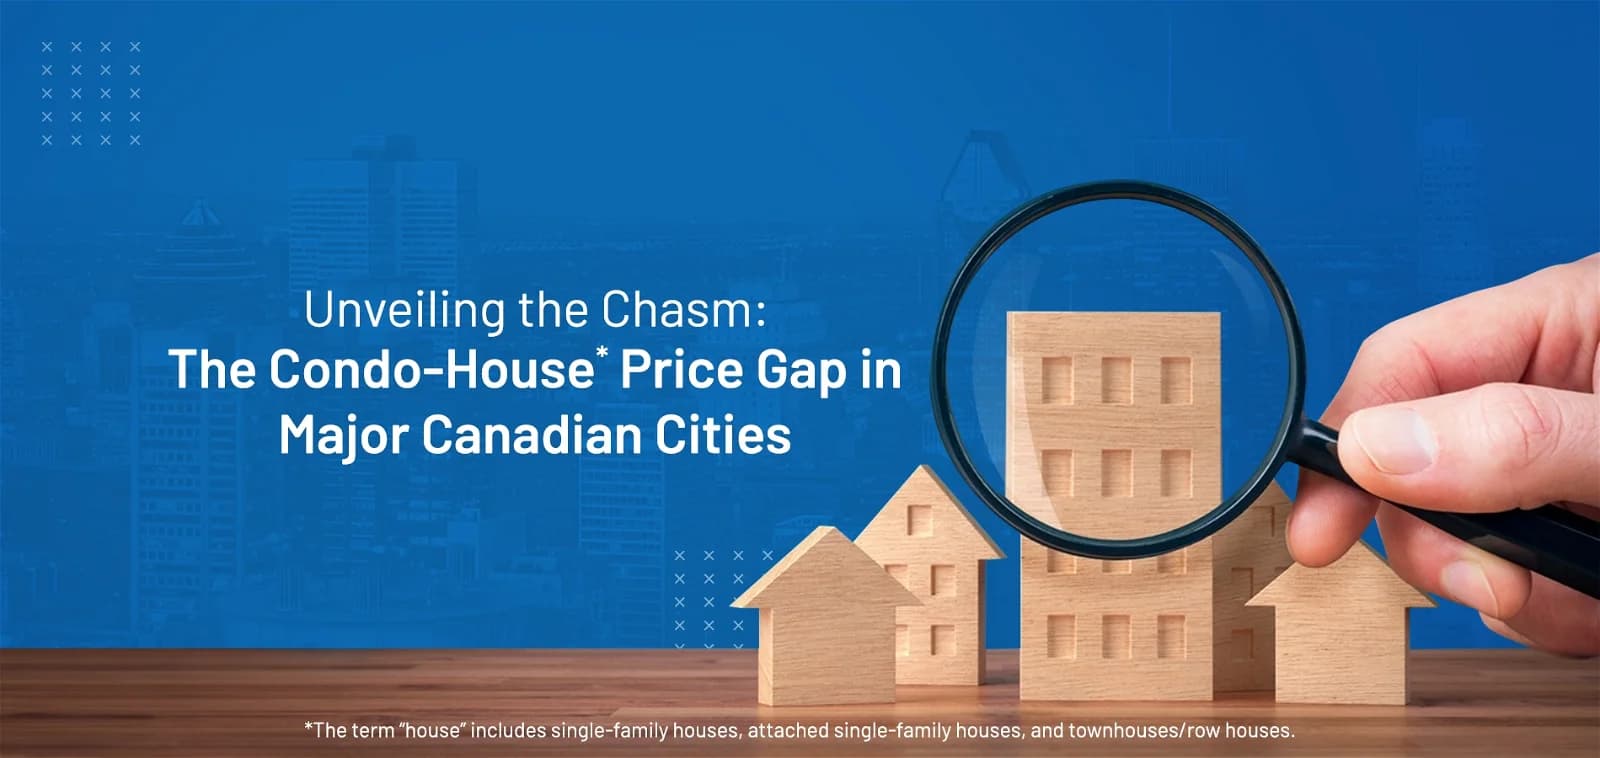 Unveiling the Chasm: A New Study Highlights the Condo-House Price Gap in Major Canadian Cities